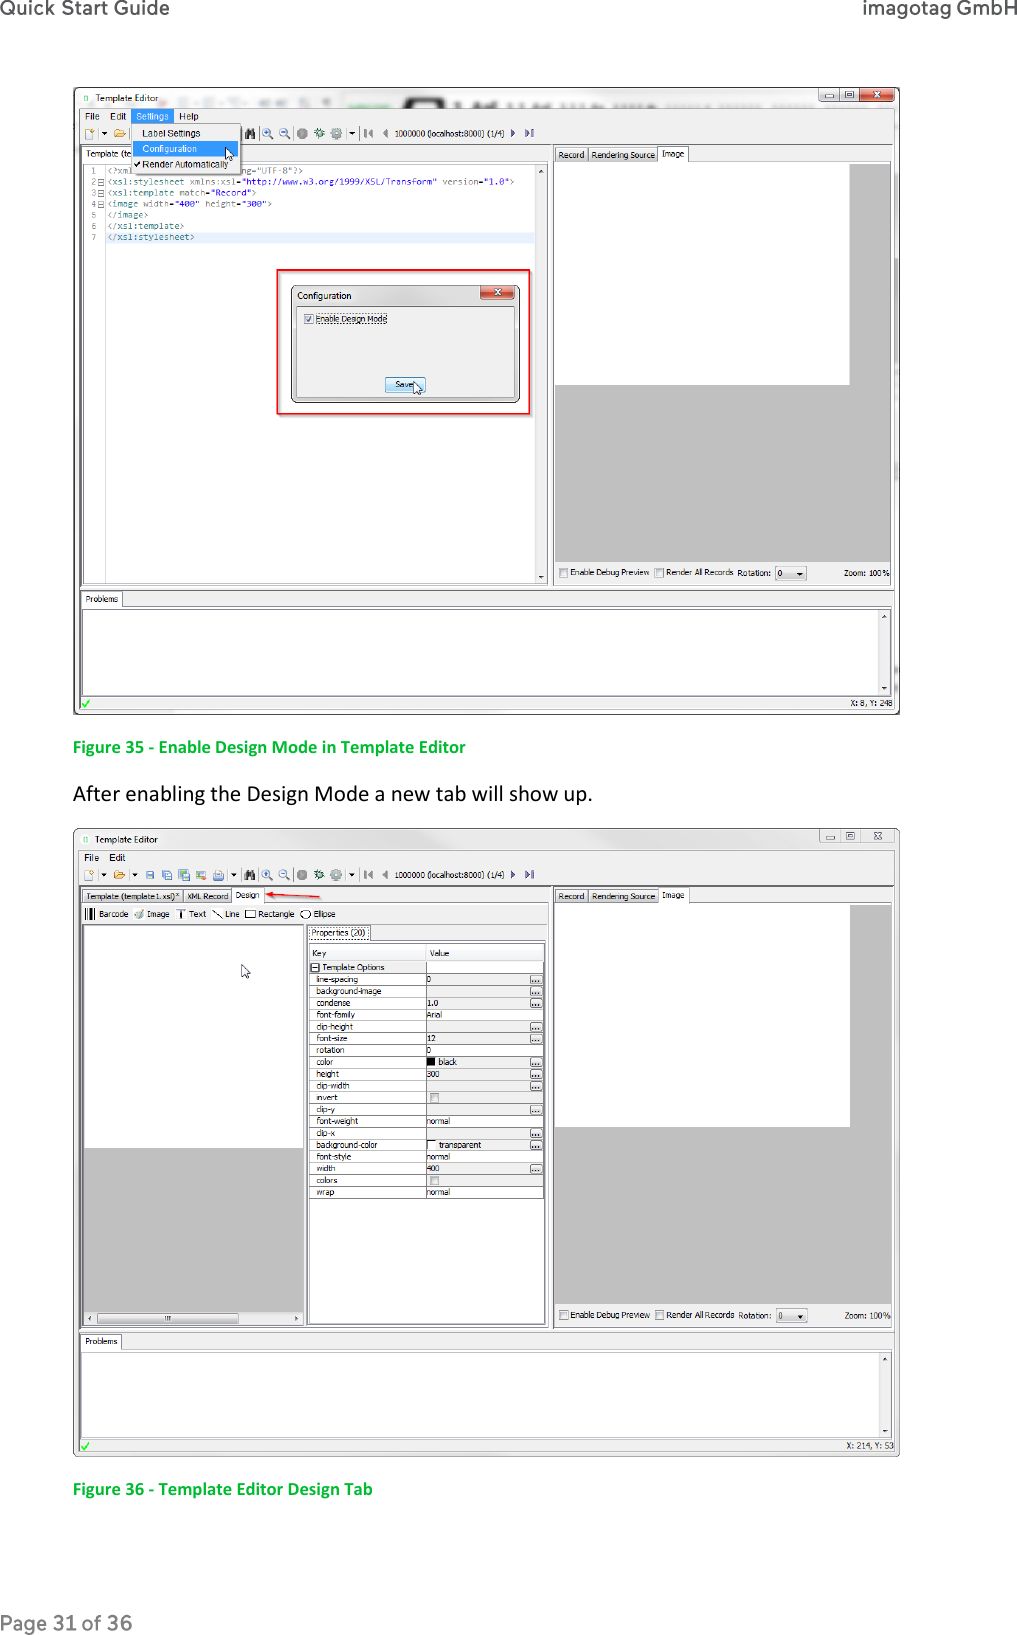  Figure 35 - Enable Design Mode in Template Editor After enabling the Design Mode a new tab will show up.  Figure 36 - Template Editor Design Tab 